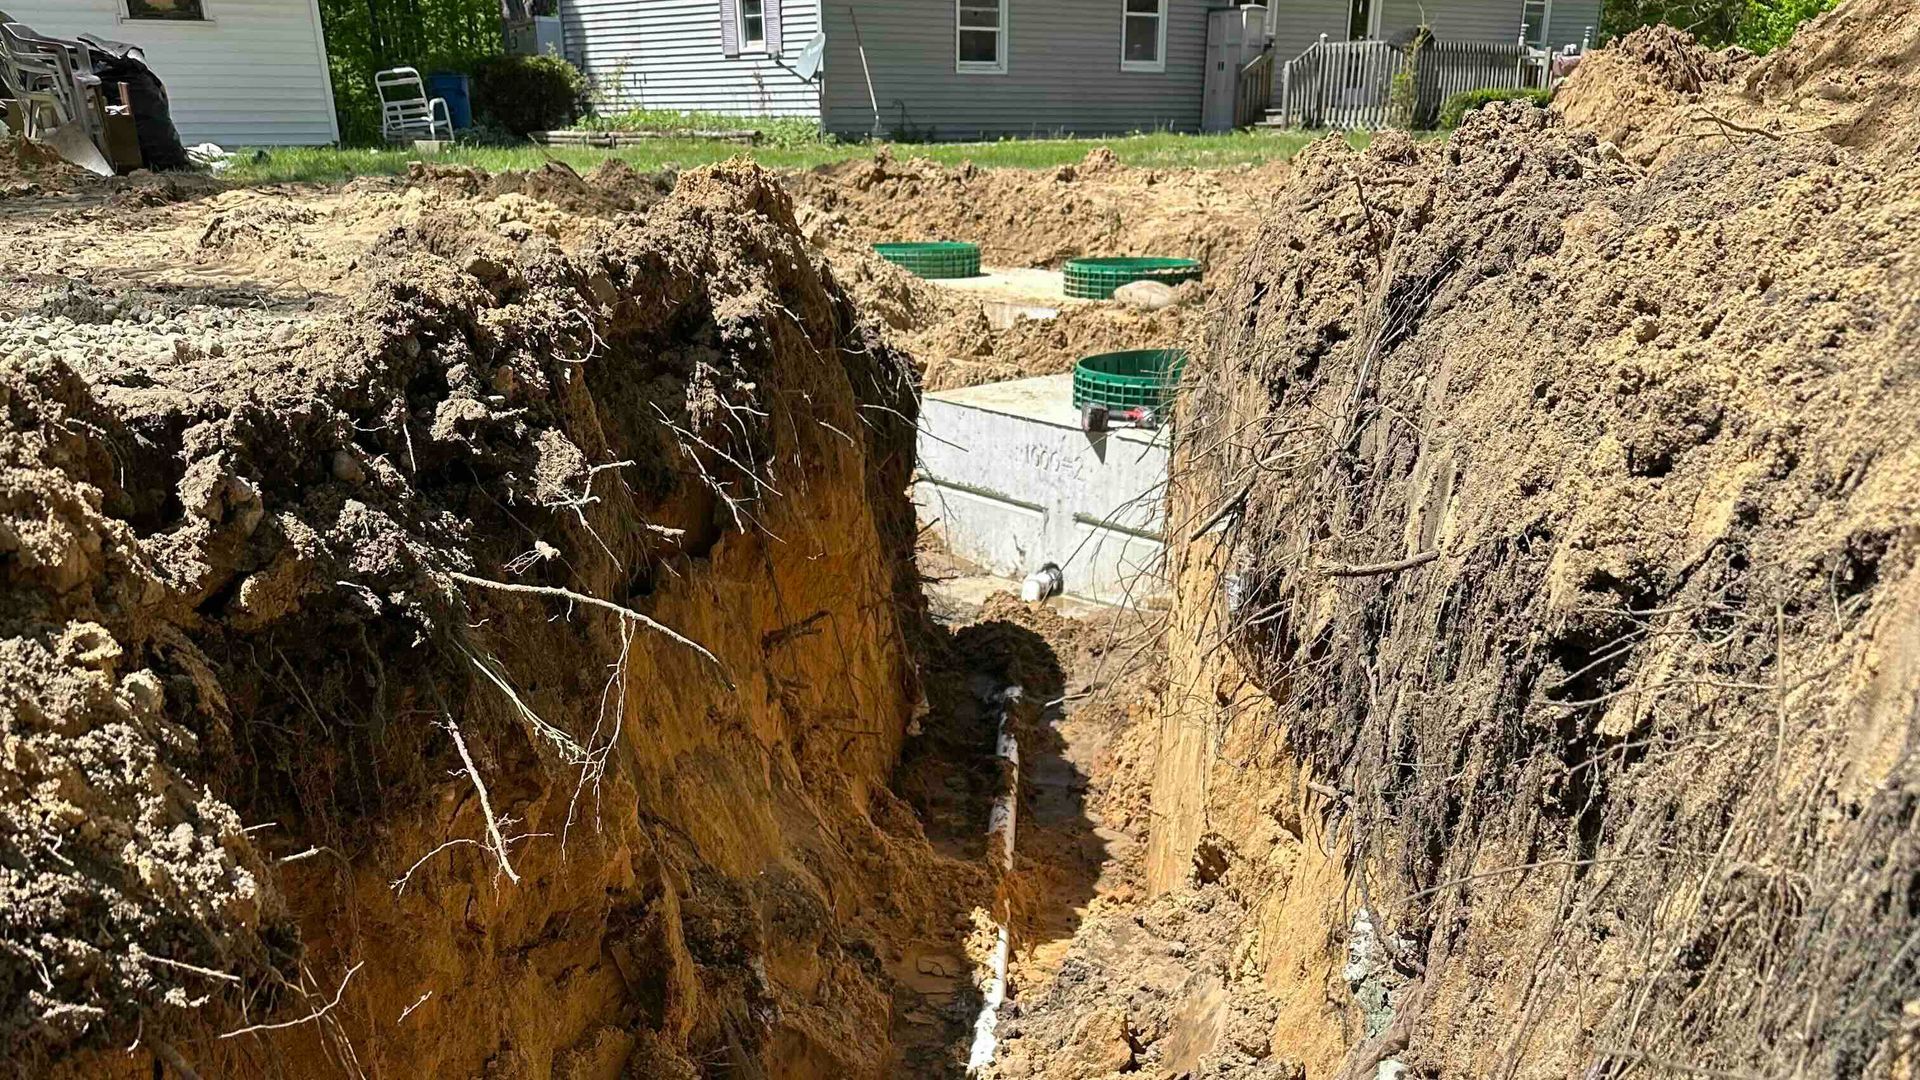 A large hole in the ground with a pipe from a septic tank and a house in the background.